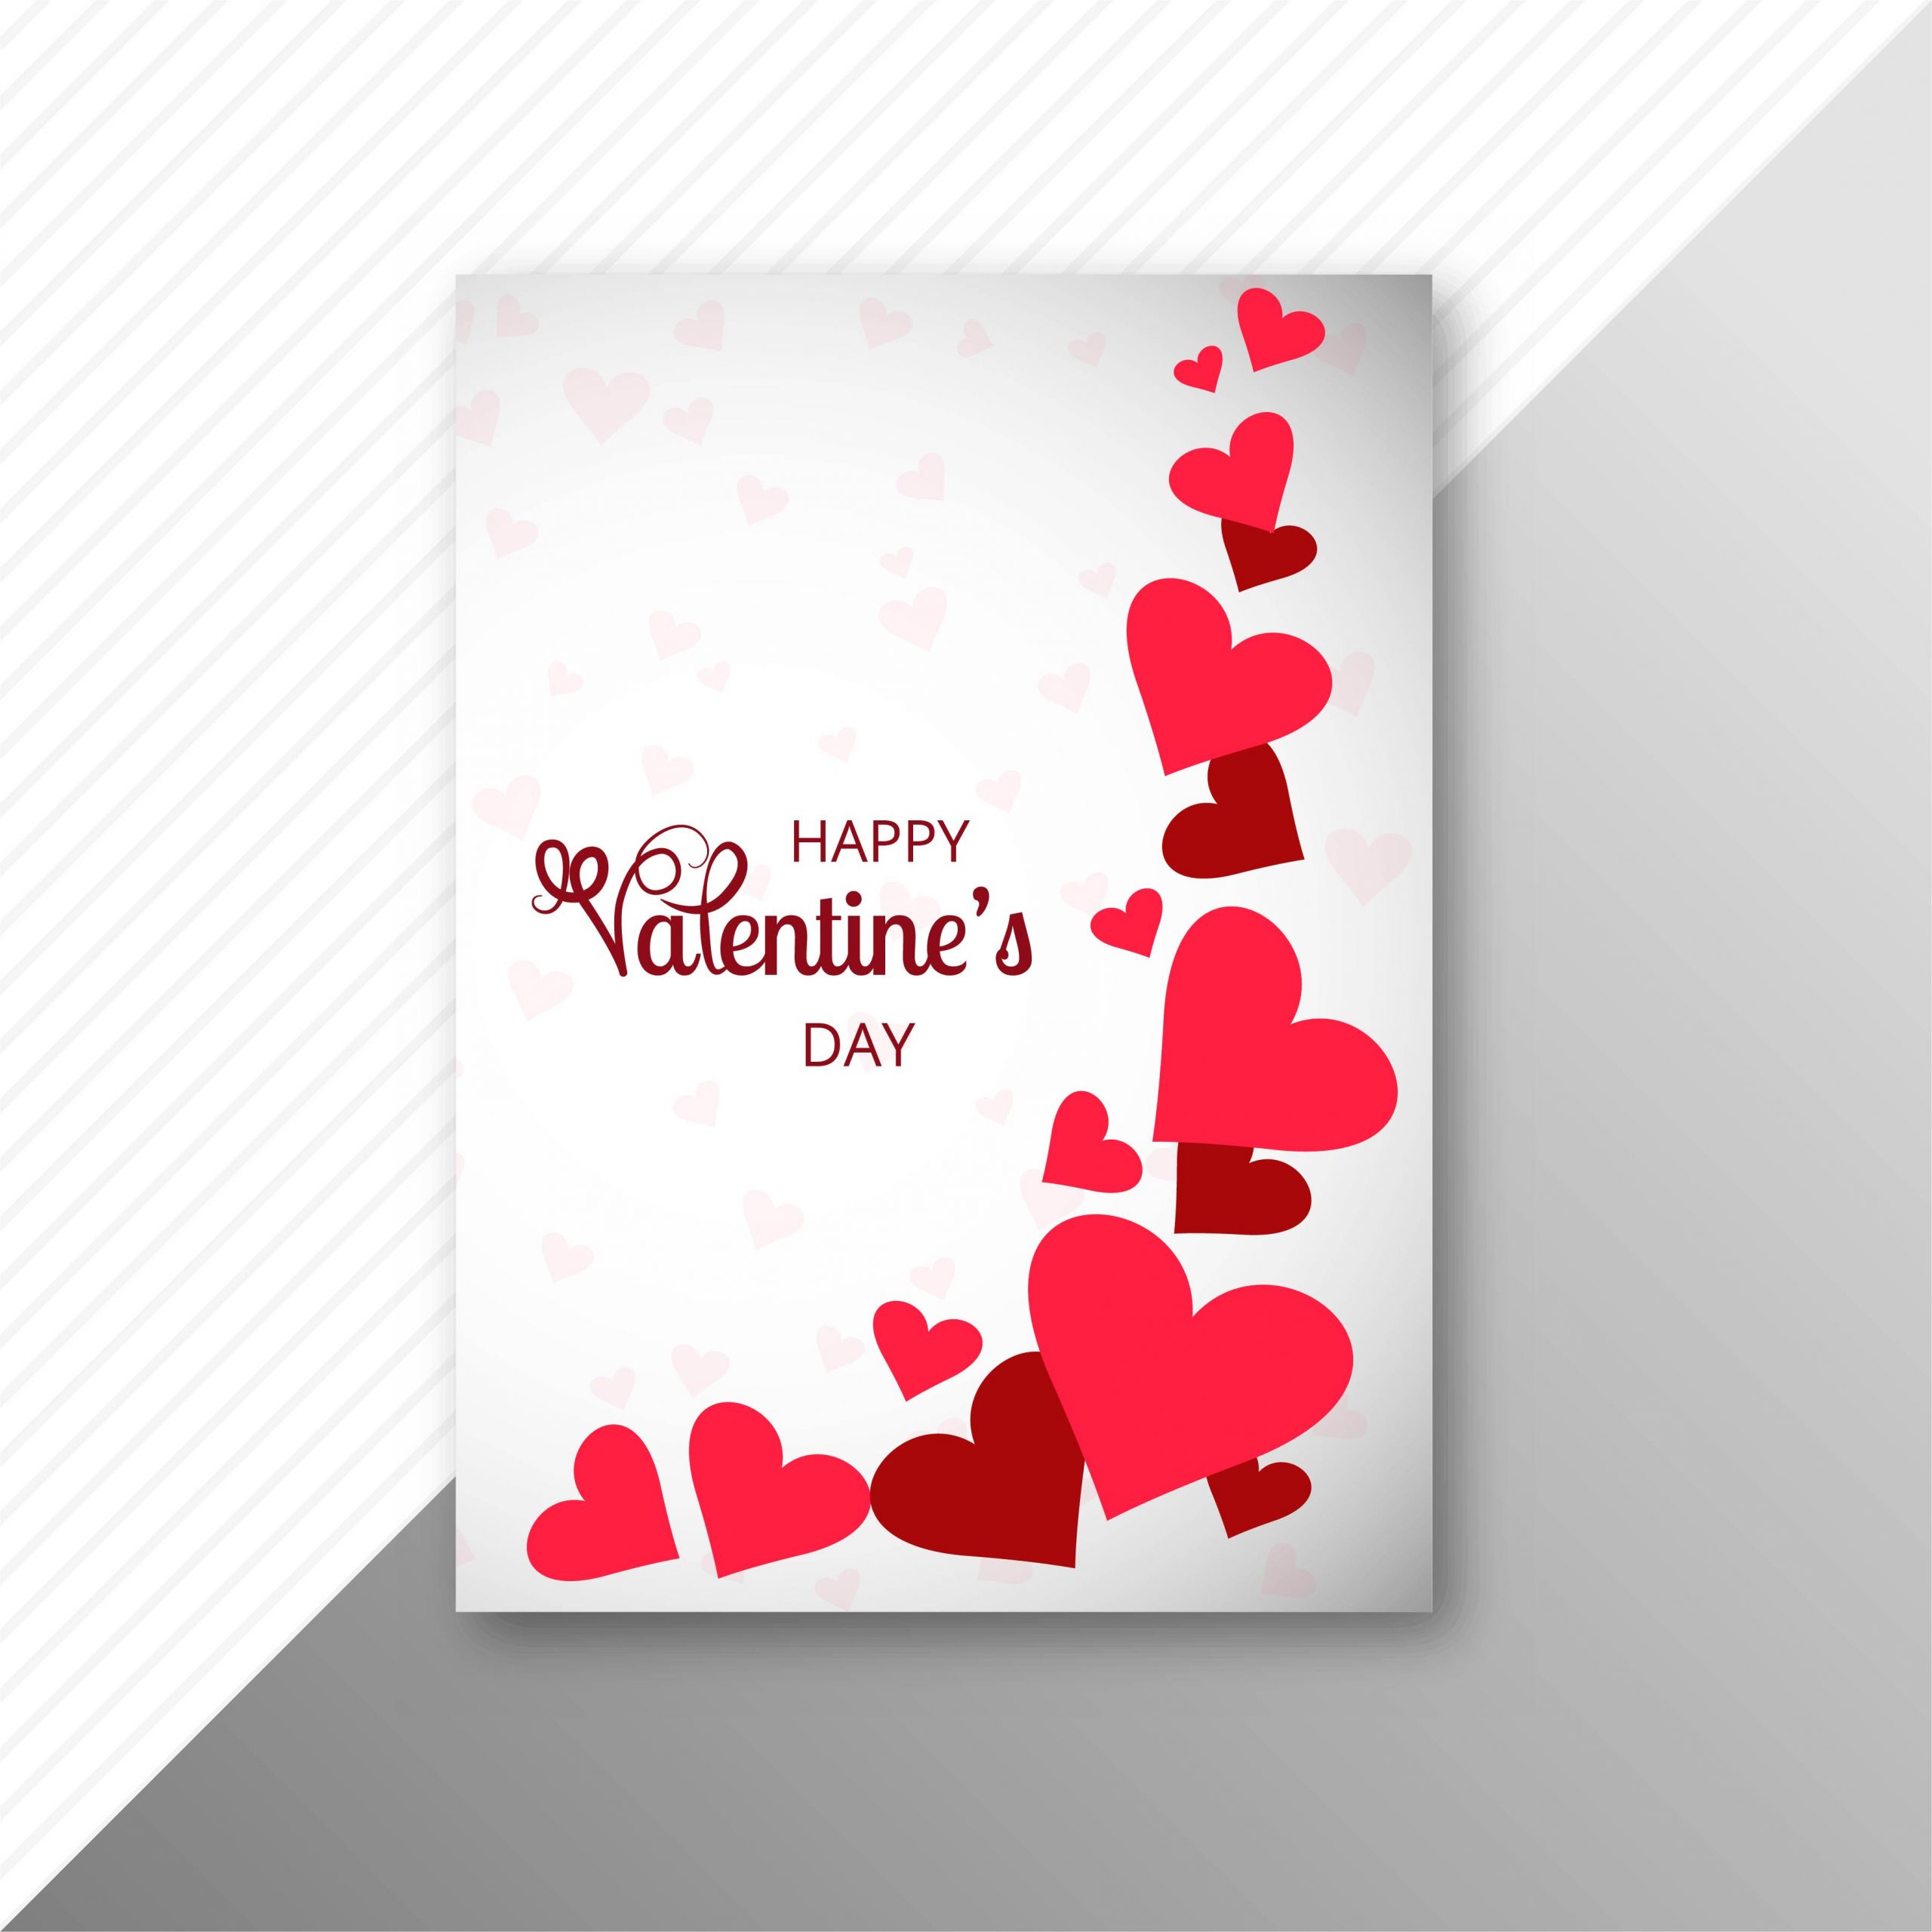 Valentines Day Card Design
 Beautiful valentine s day card template design vector